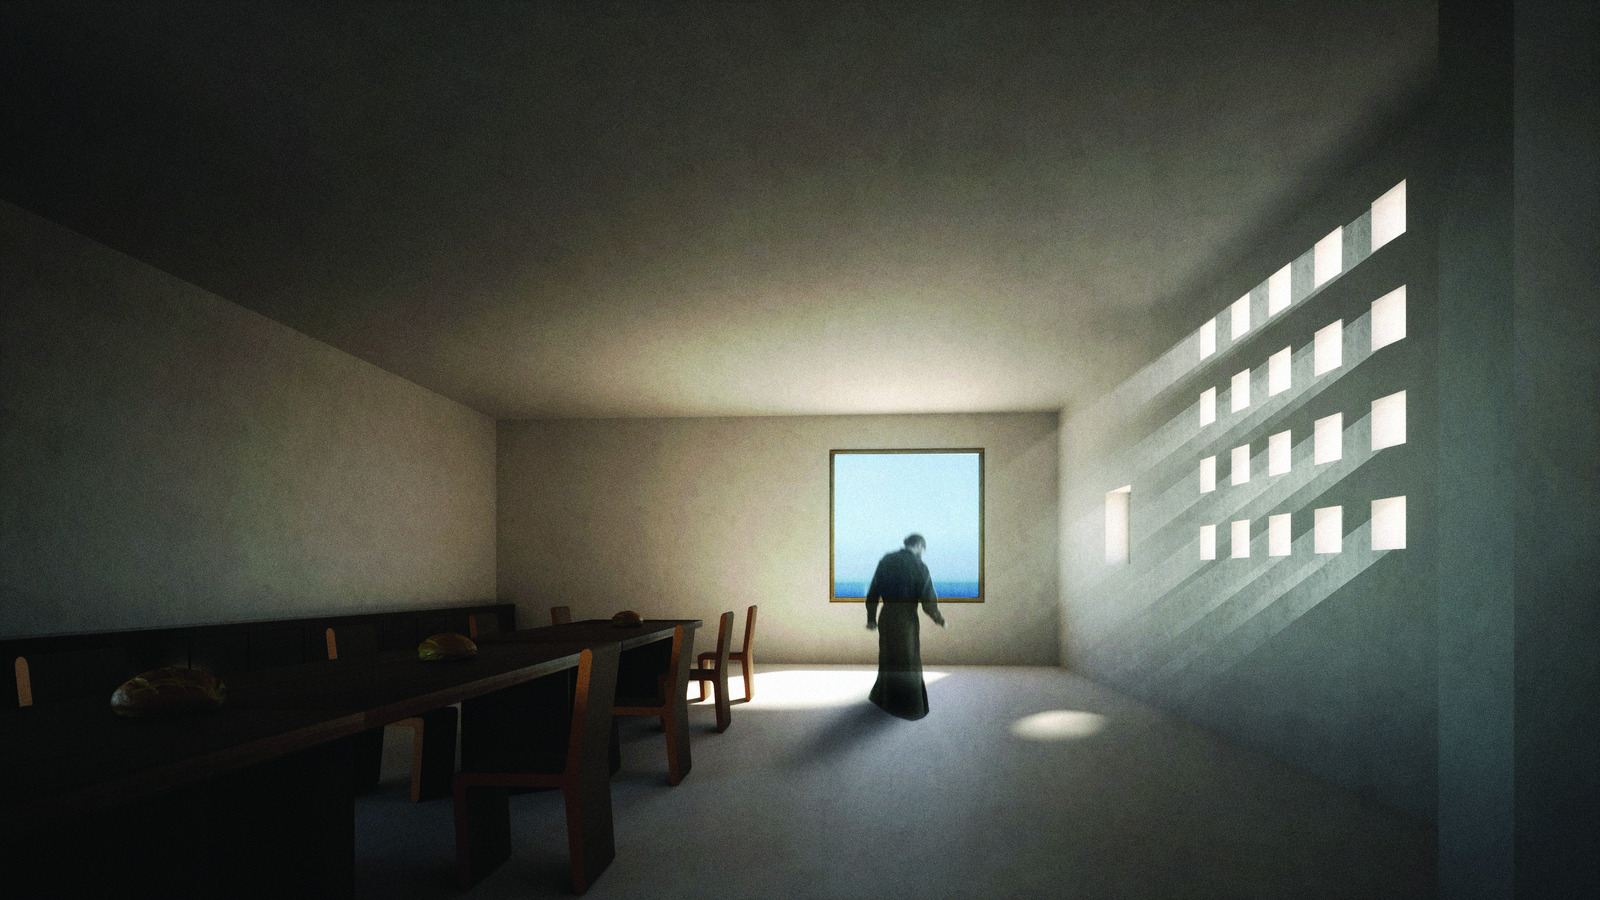 Archisearch A Contemporary Approach to Monasticism in Folegandros: The Secluded Chapel of Agios Sostis | Diploma thesis project by Apostolaki Konstantina, Spathis Panagiotis, Zachariaki Anna-Eleftheria